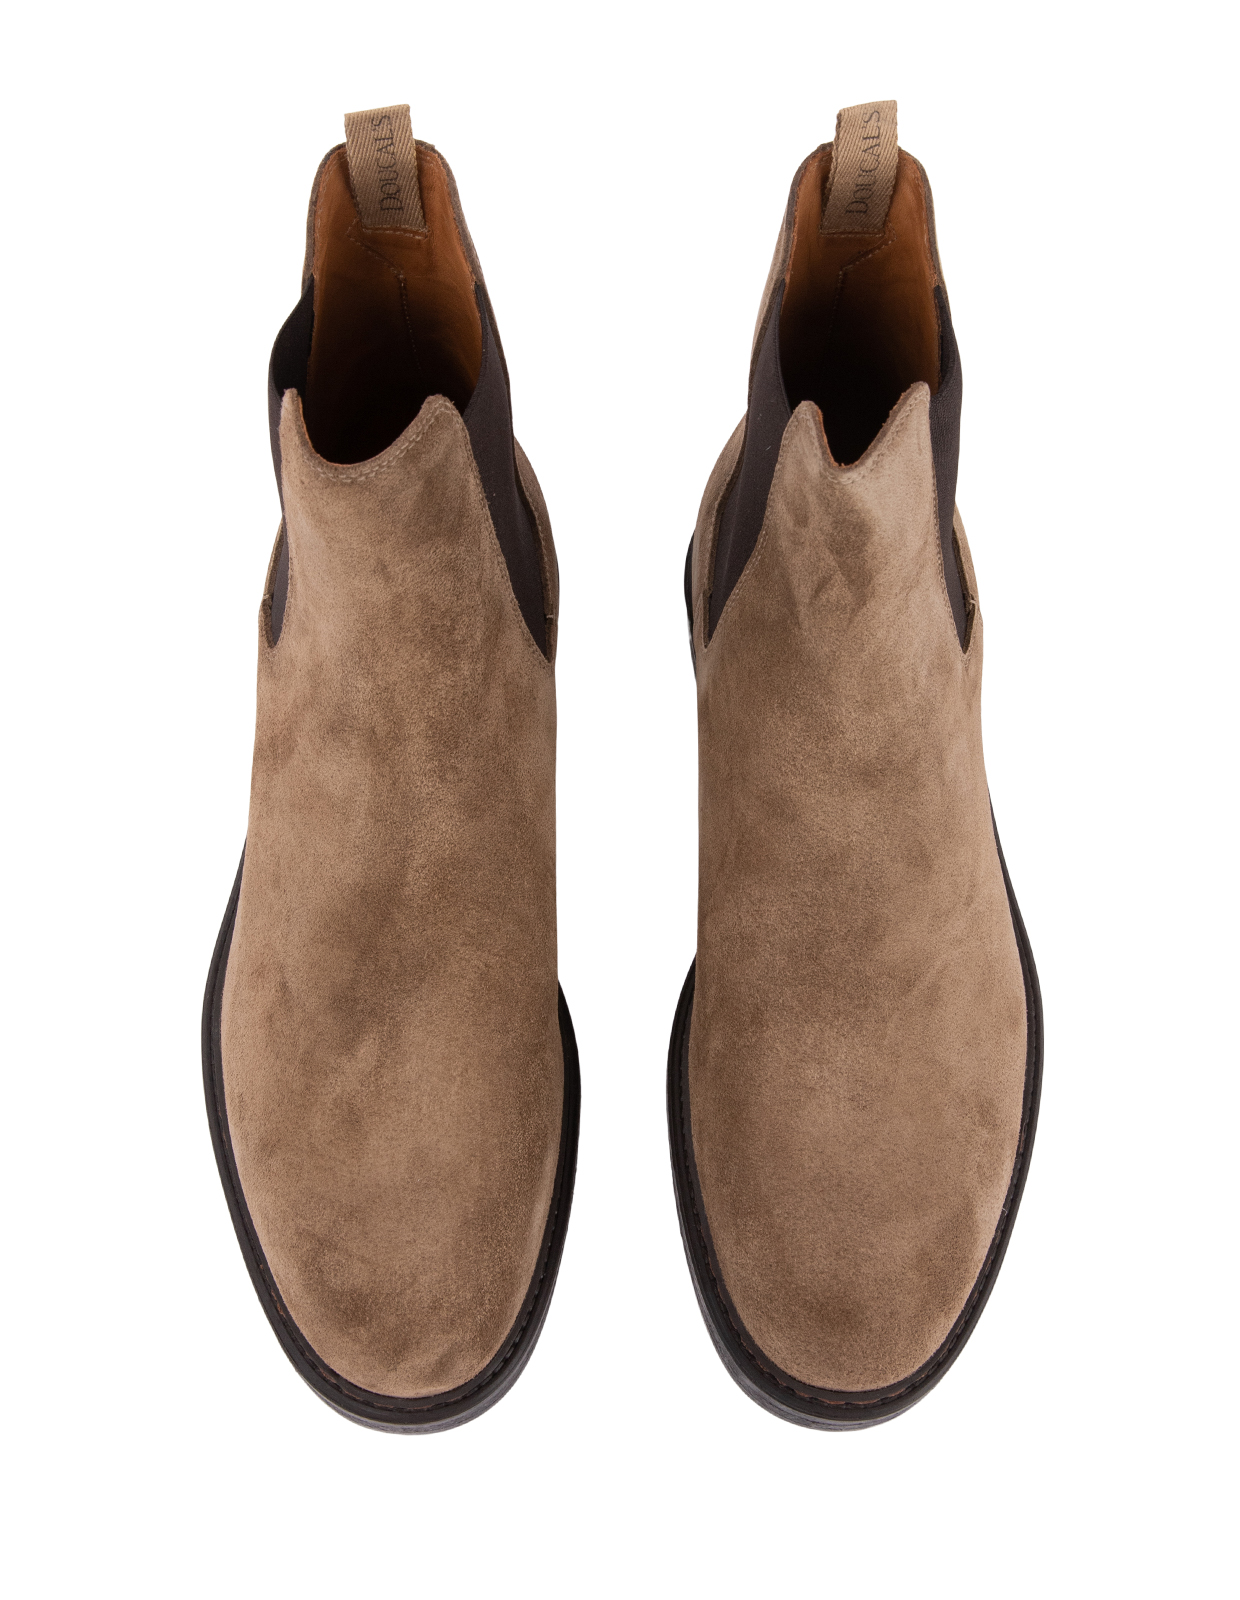 Chelsea Boots Tabacco Stl 40.5